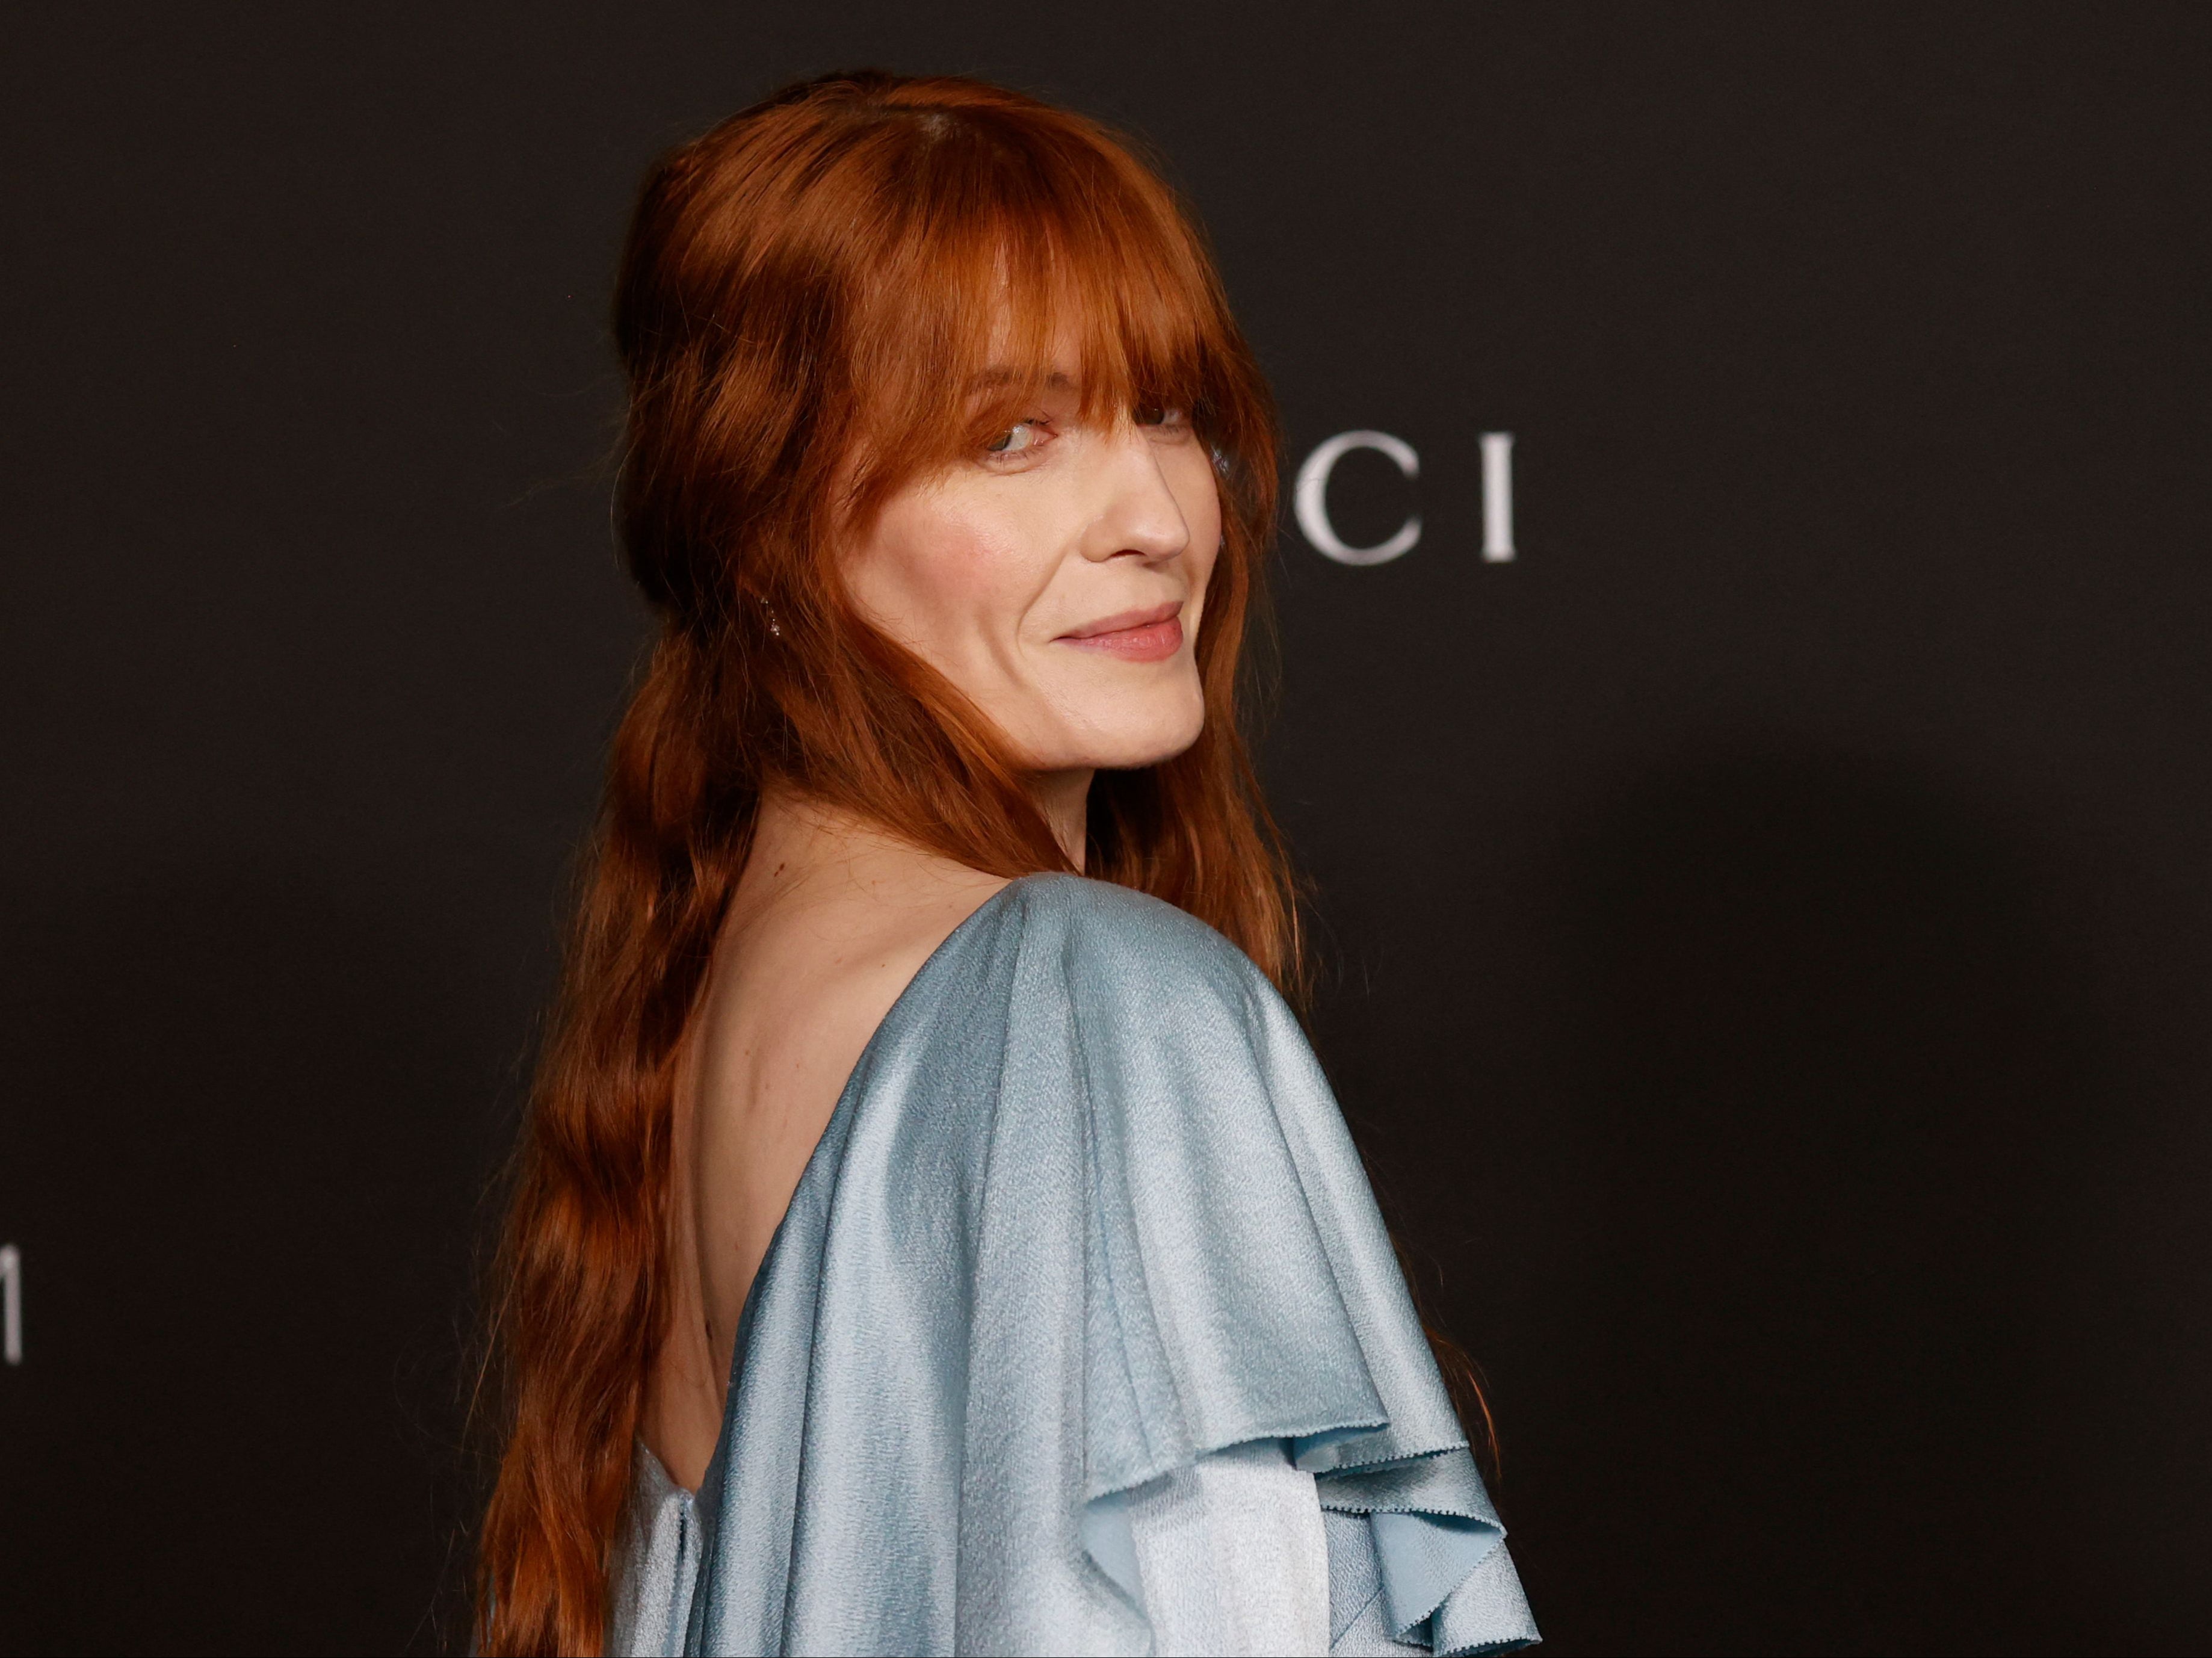 Florence Welch suffered from an eating disorder from age 17